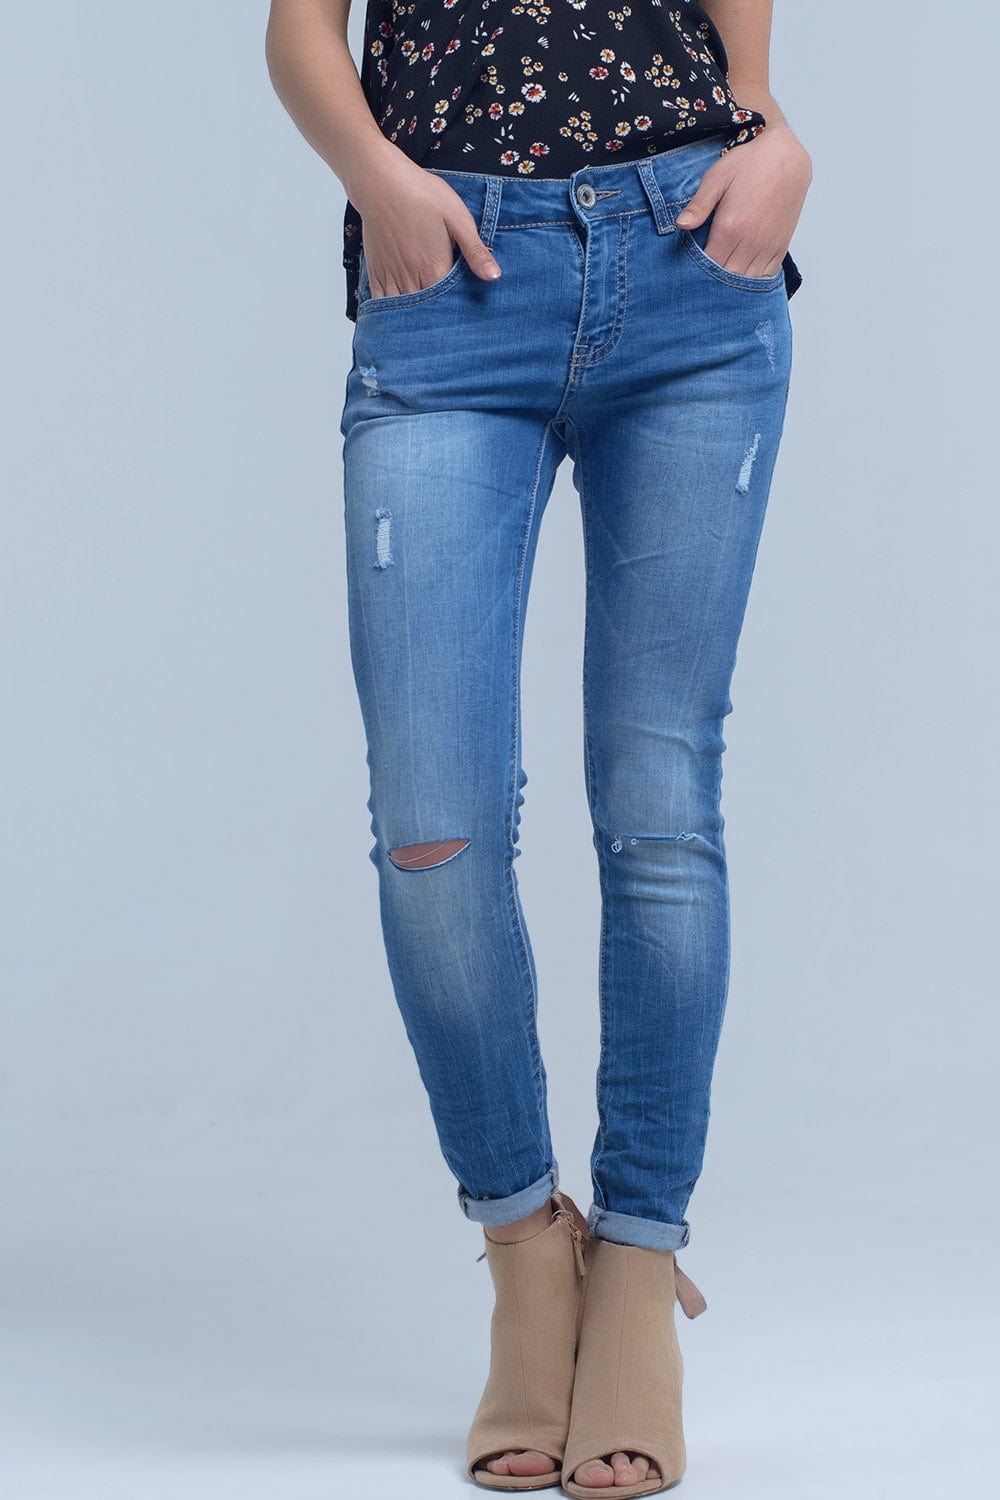 Q2 Women's Jean Skinny jeans with rips knee